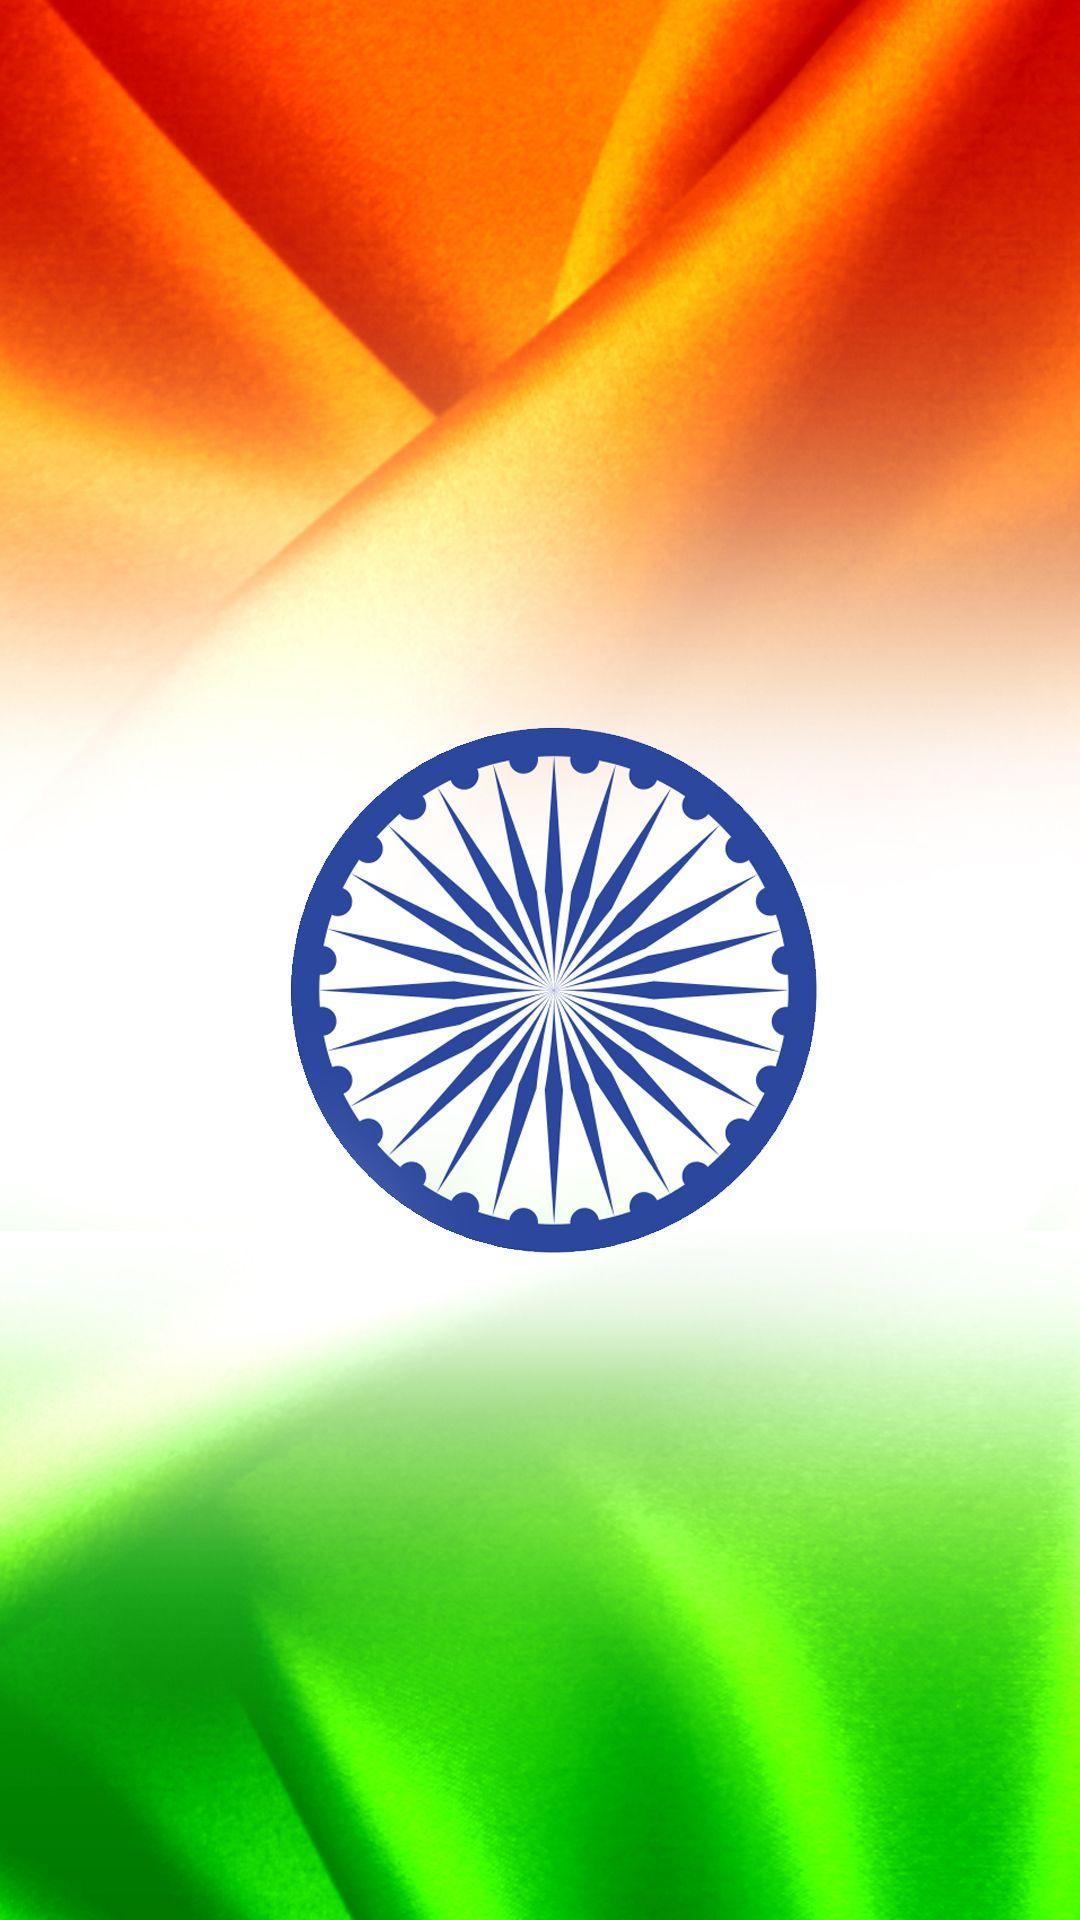 India Flag for Mobile Phone Wallpaper 11 of 17 India